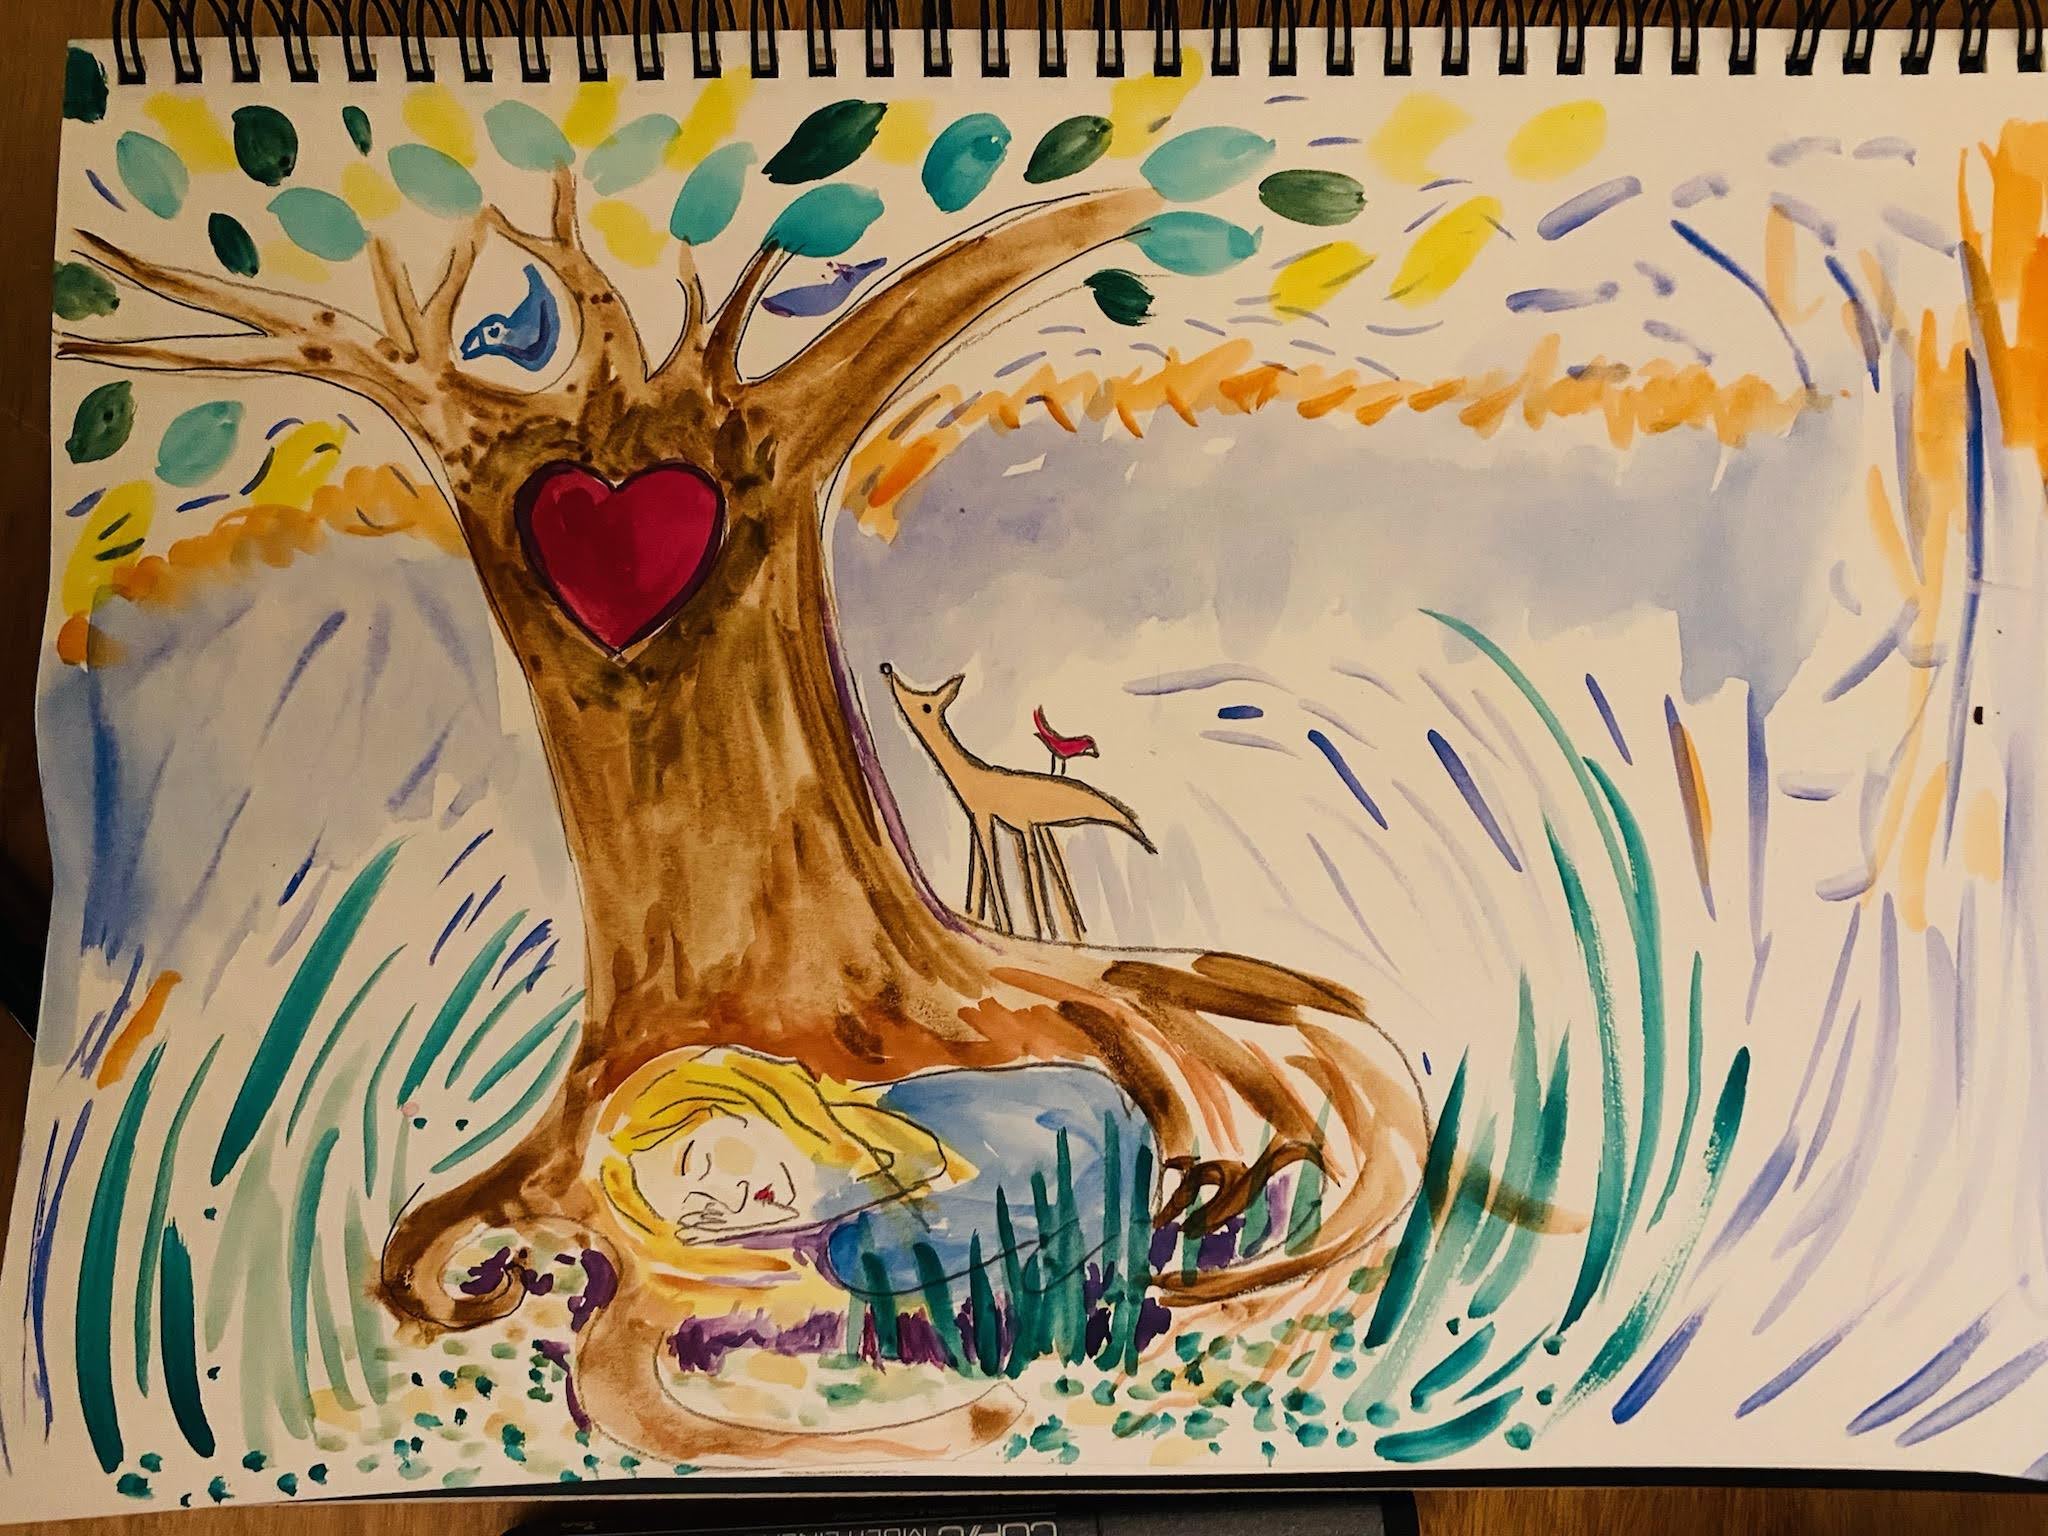 ‘Heartwood’ Art work done by Alex Childs as part of the Art Therapy session
August 2021